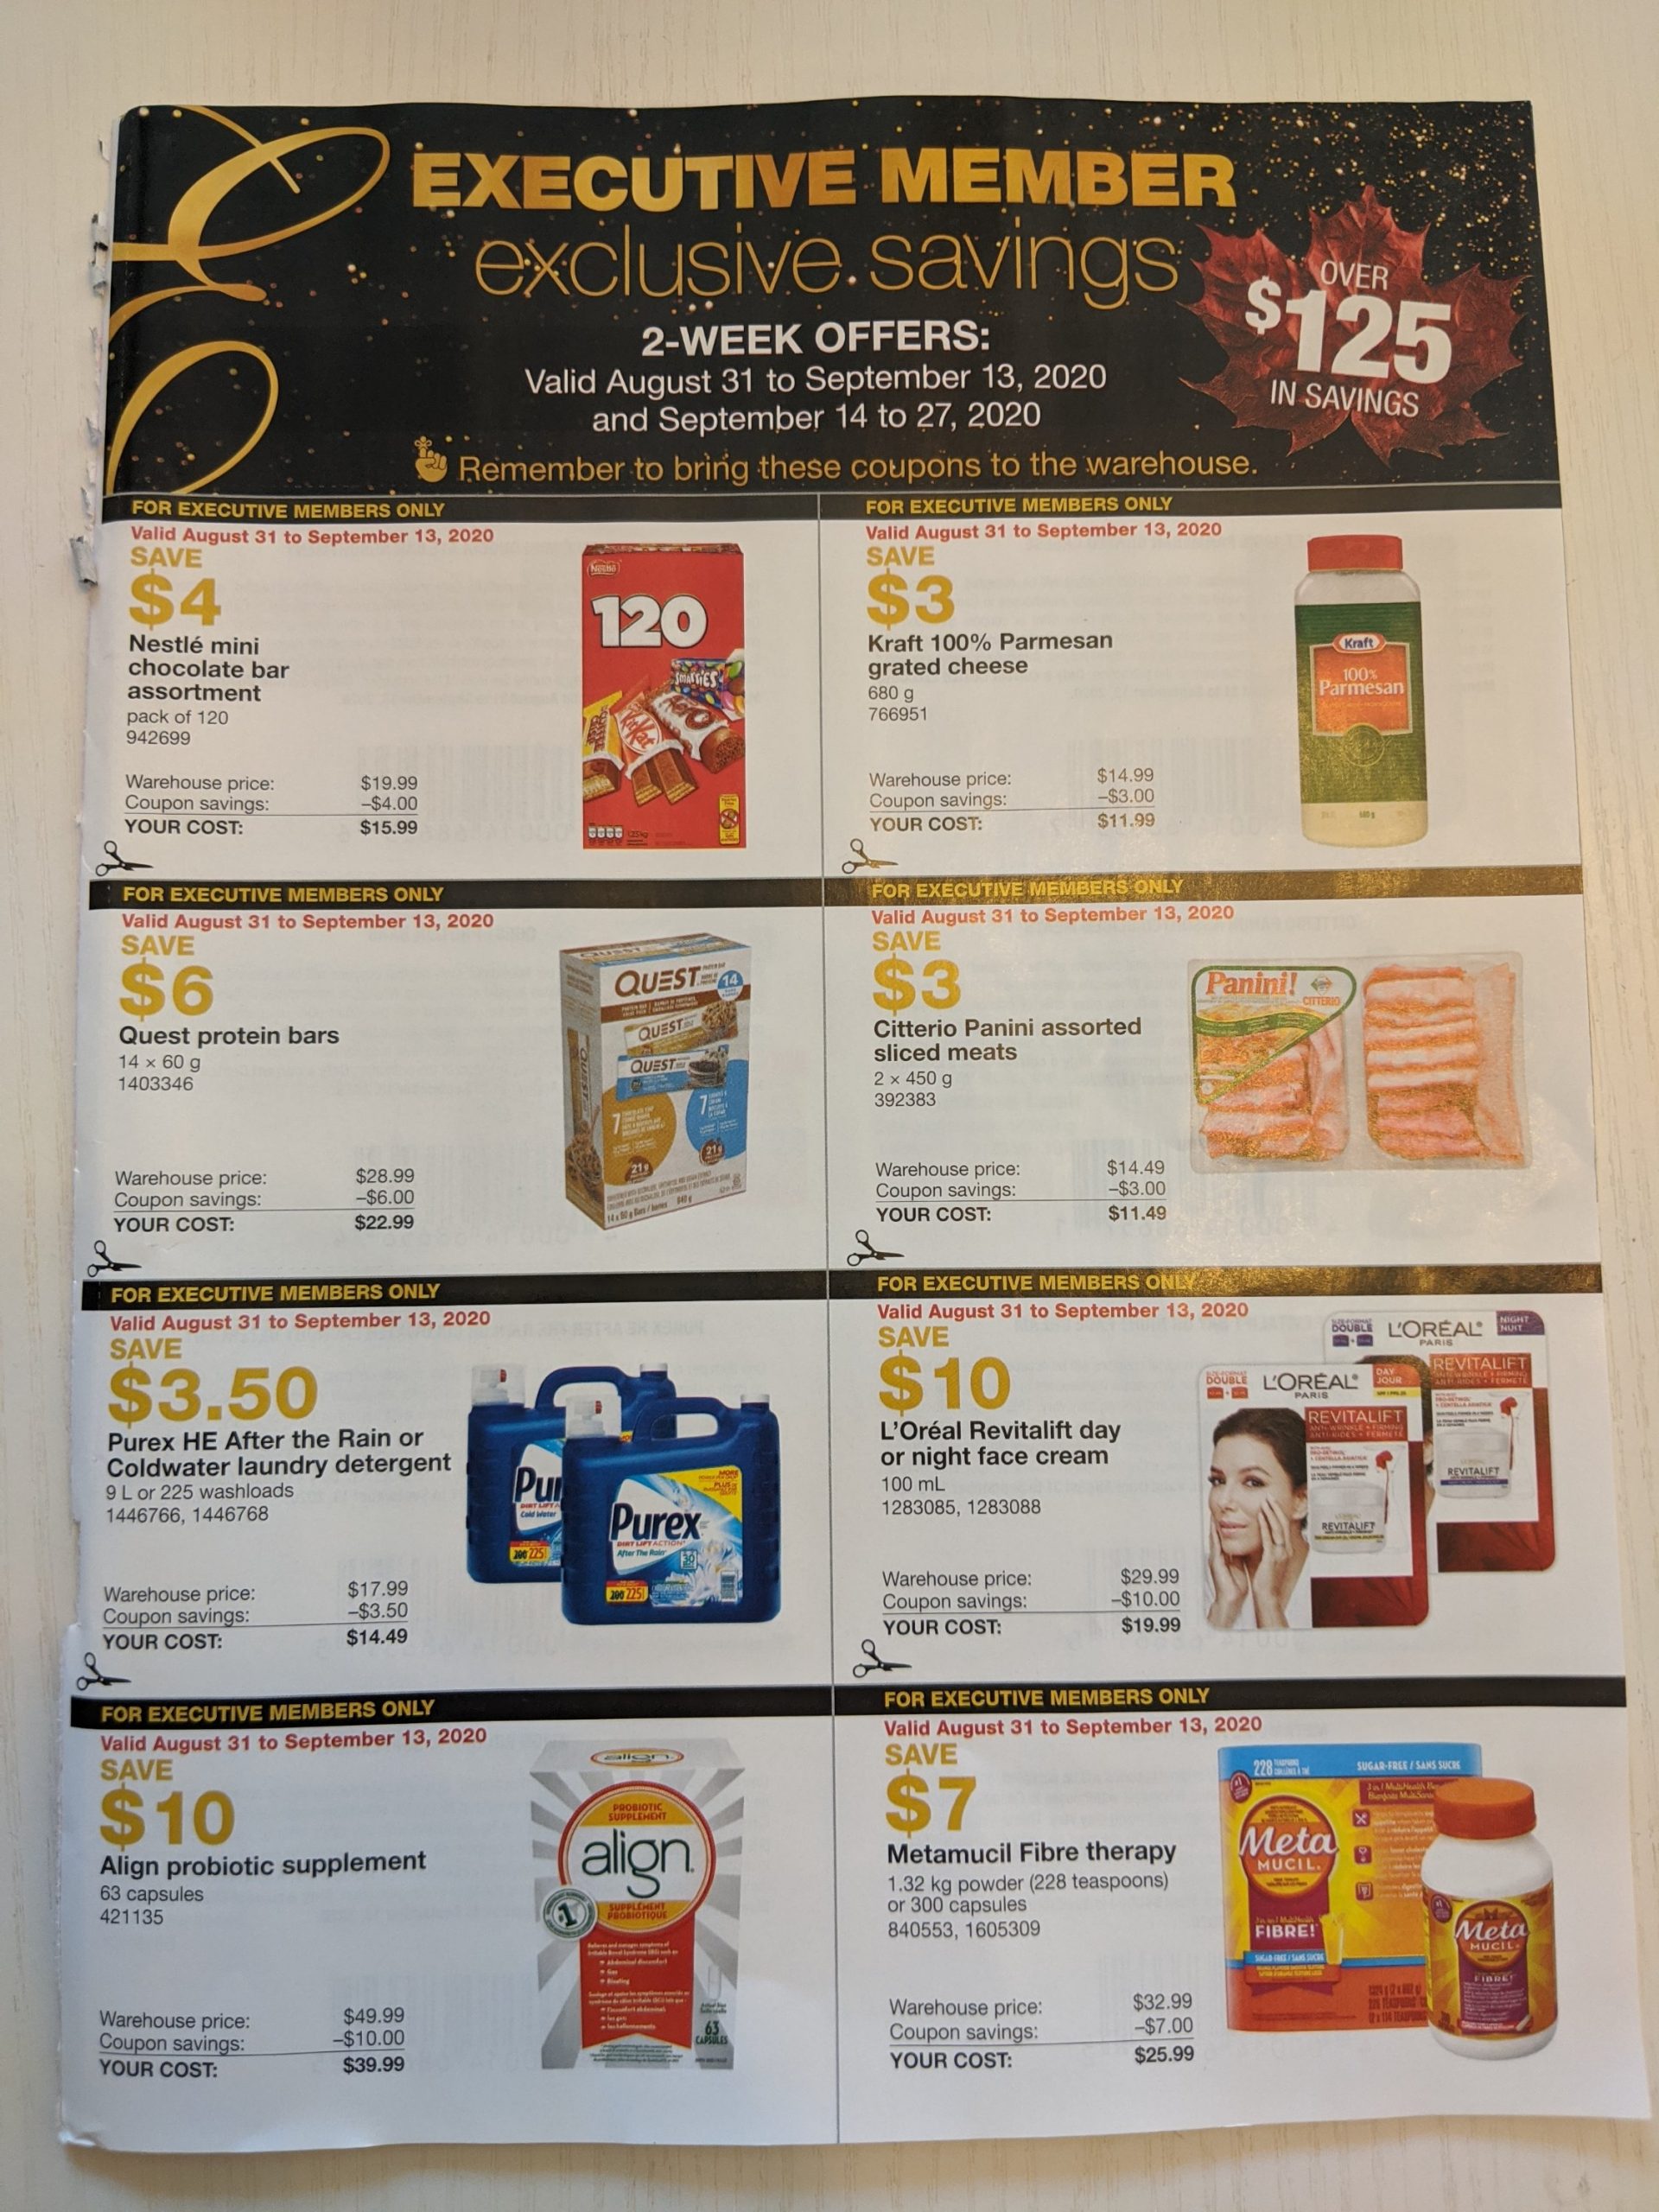 Costco Canada executive coupons fall 2020 - Save Money in Winnipeg